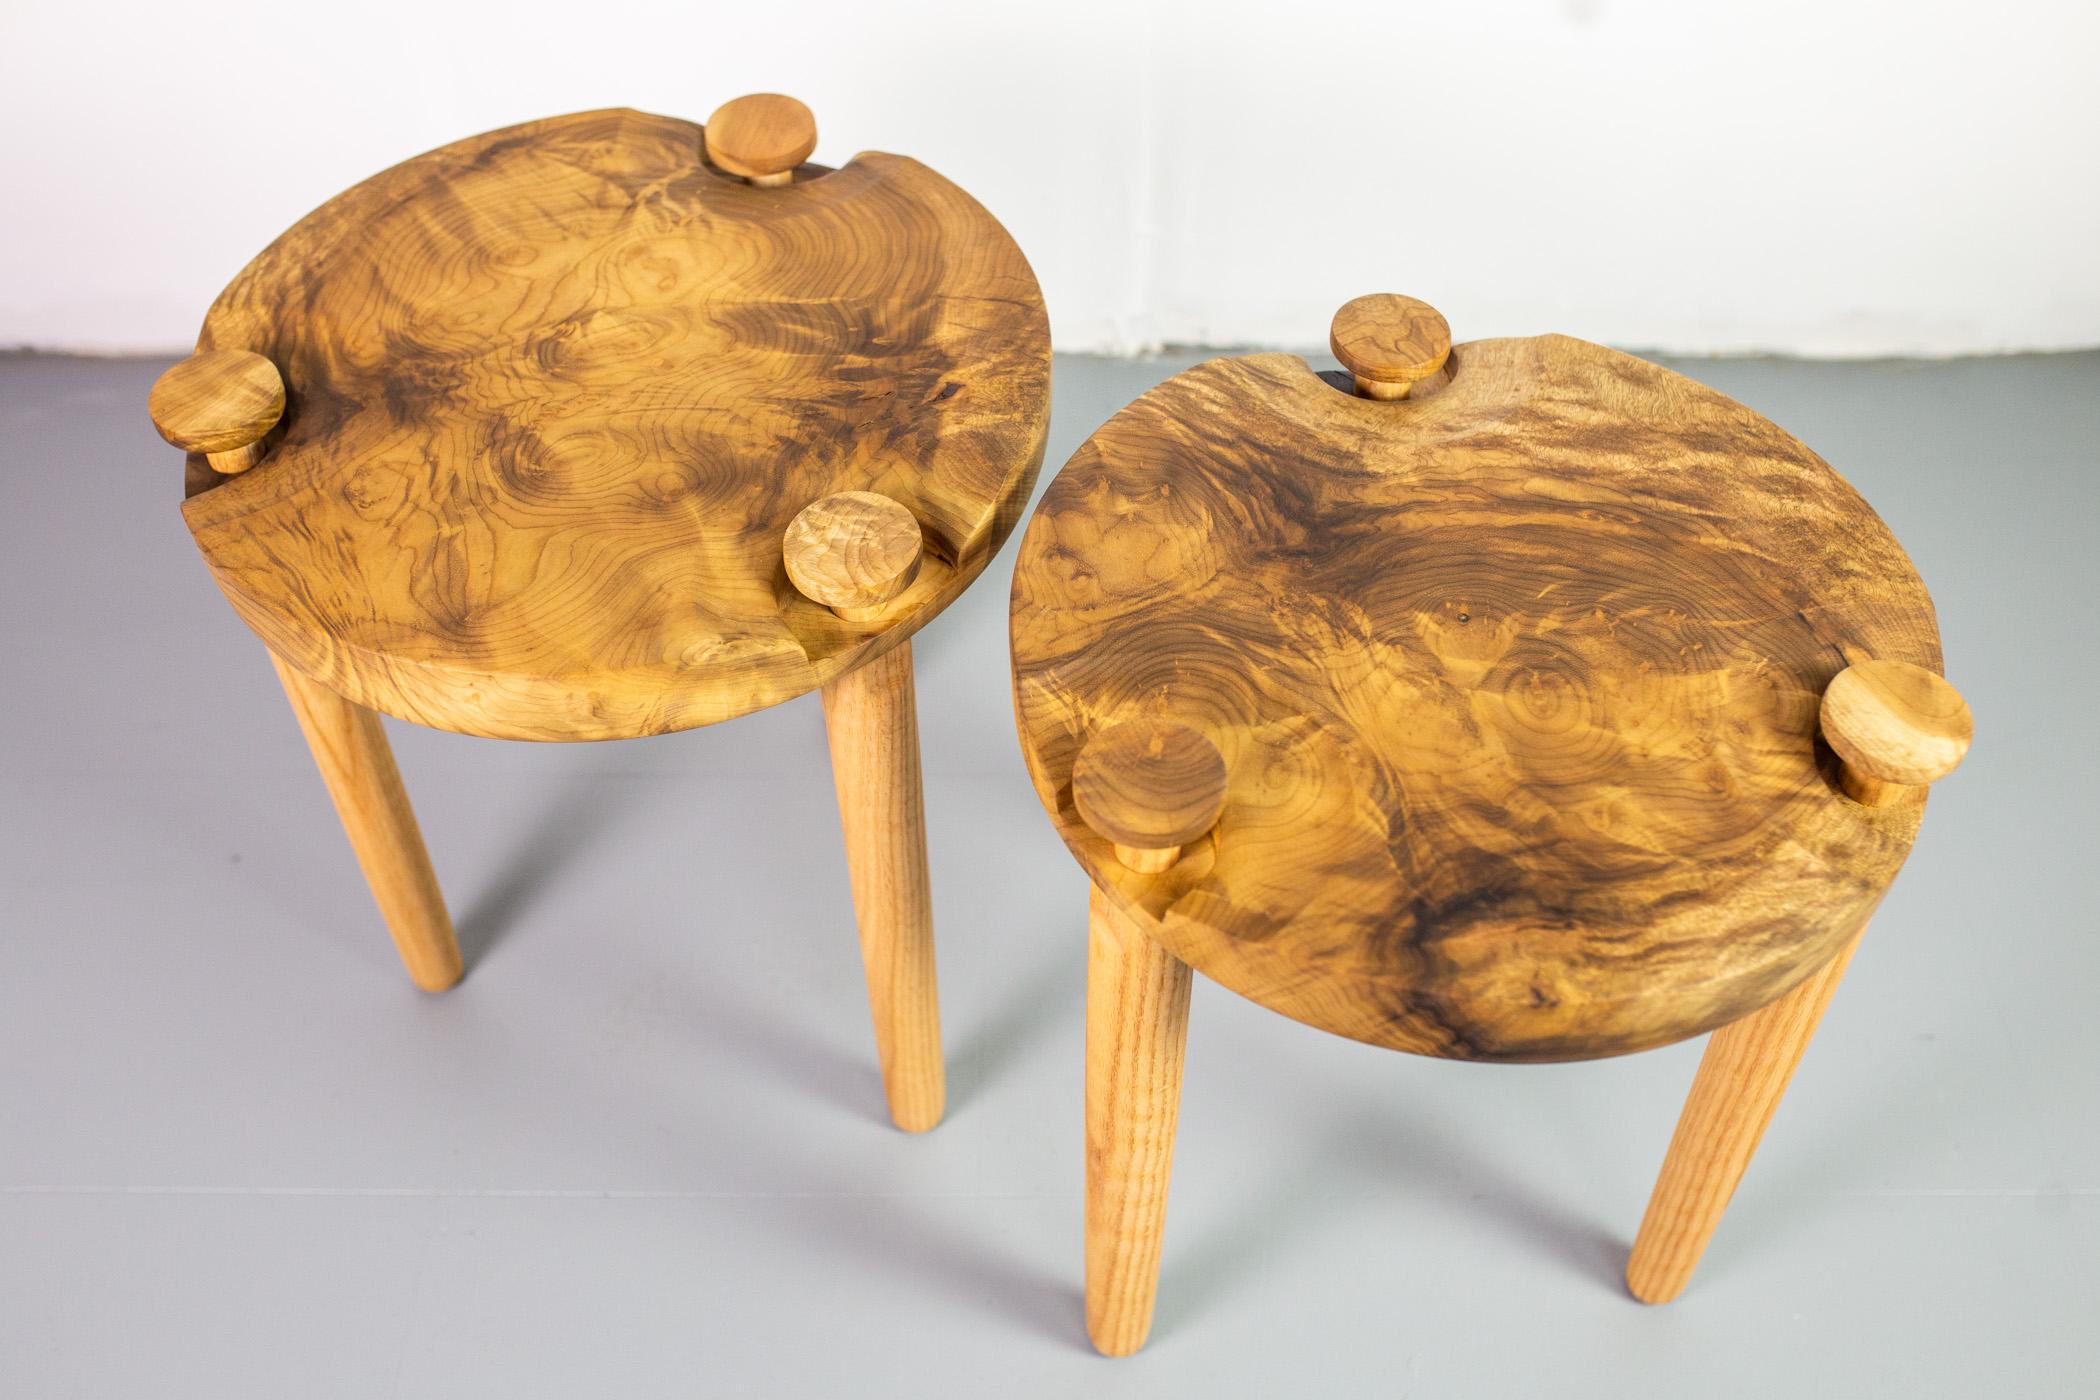 Pair of side tables in white oak burl top and curly red oak legs by Michael Rozell made in USA, 2020.
Signed!